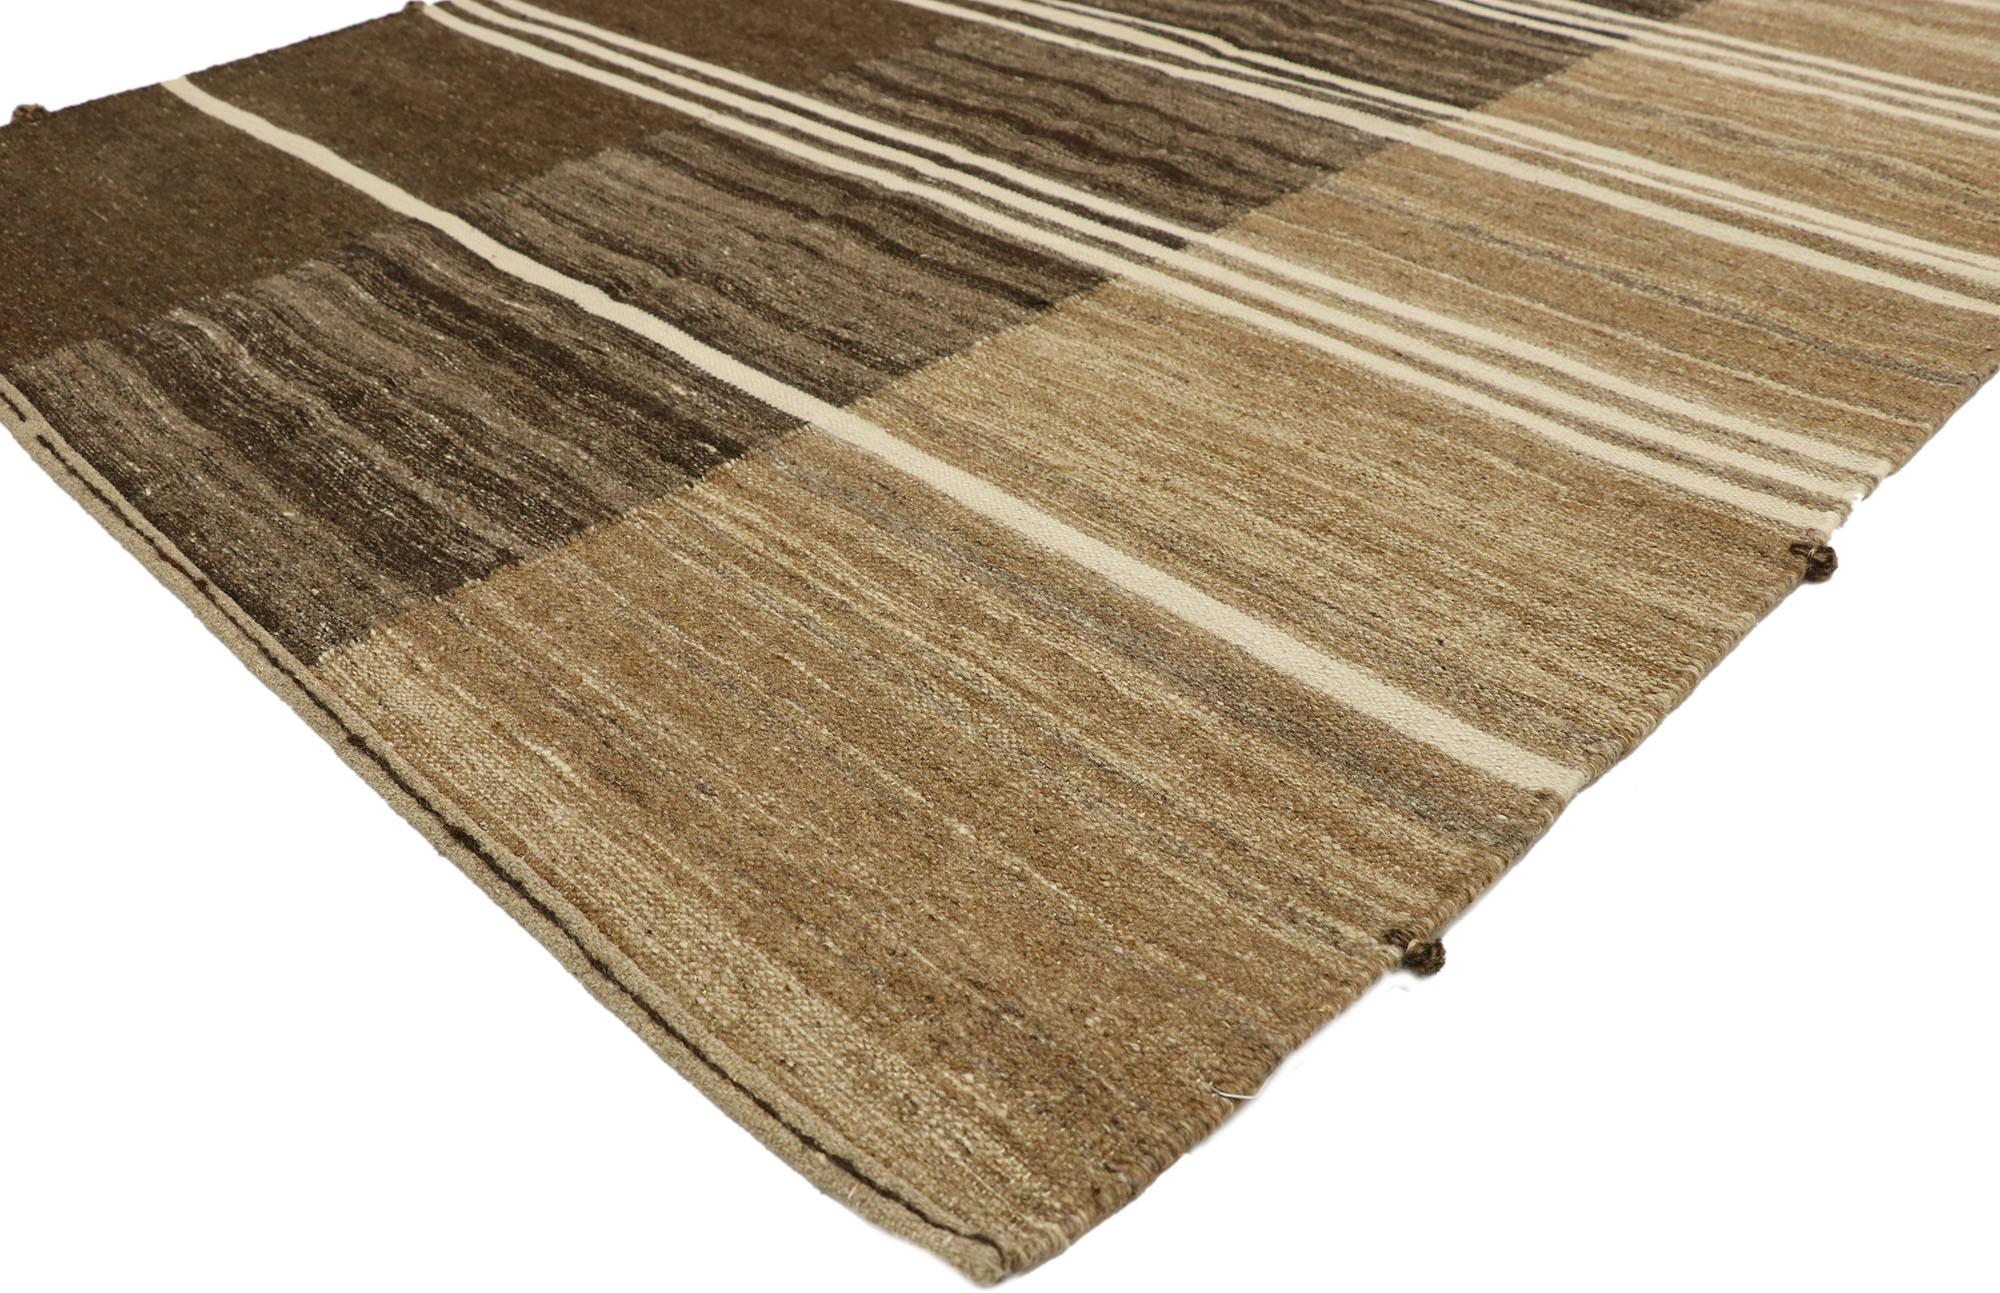 Indian New Contemporary Striped Kilim Rug with Modern Style, Brown Flat-Weave Rug